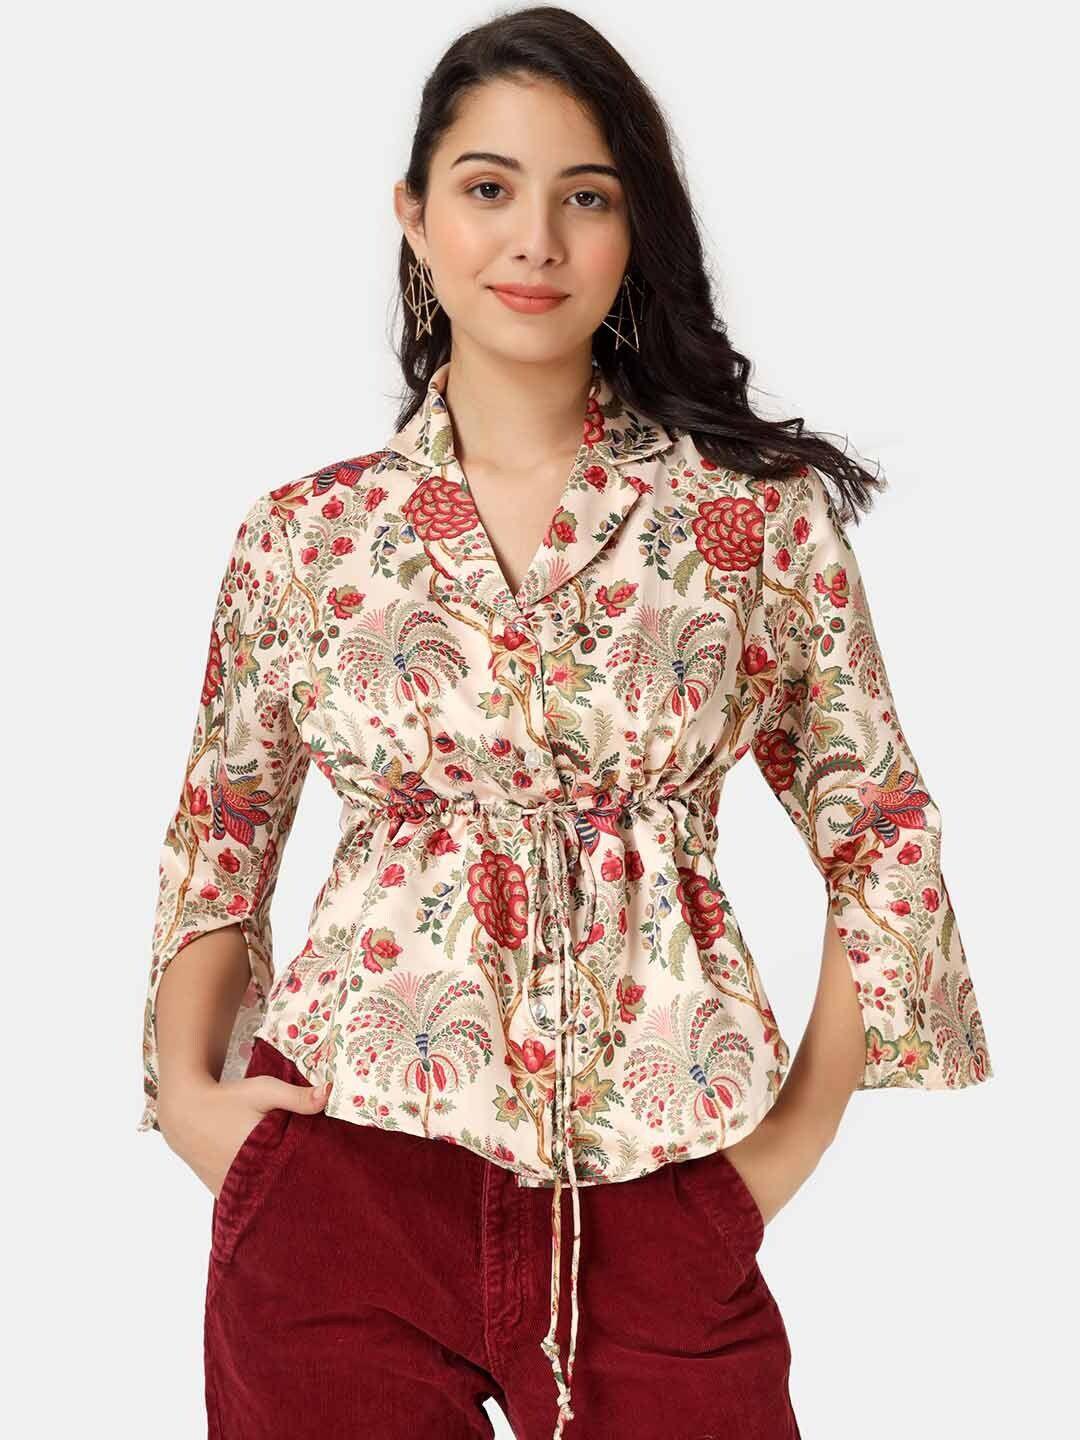 angloindu cream-coloured & red floral print cinched waist top